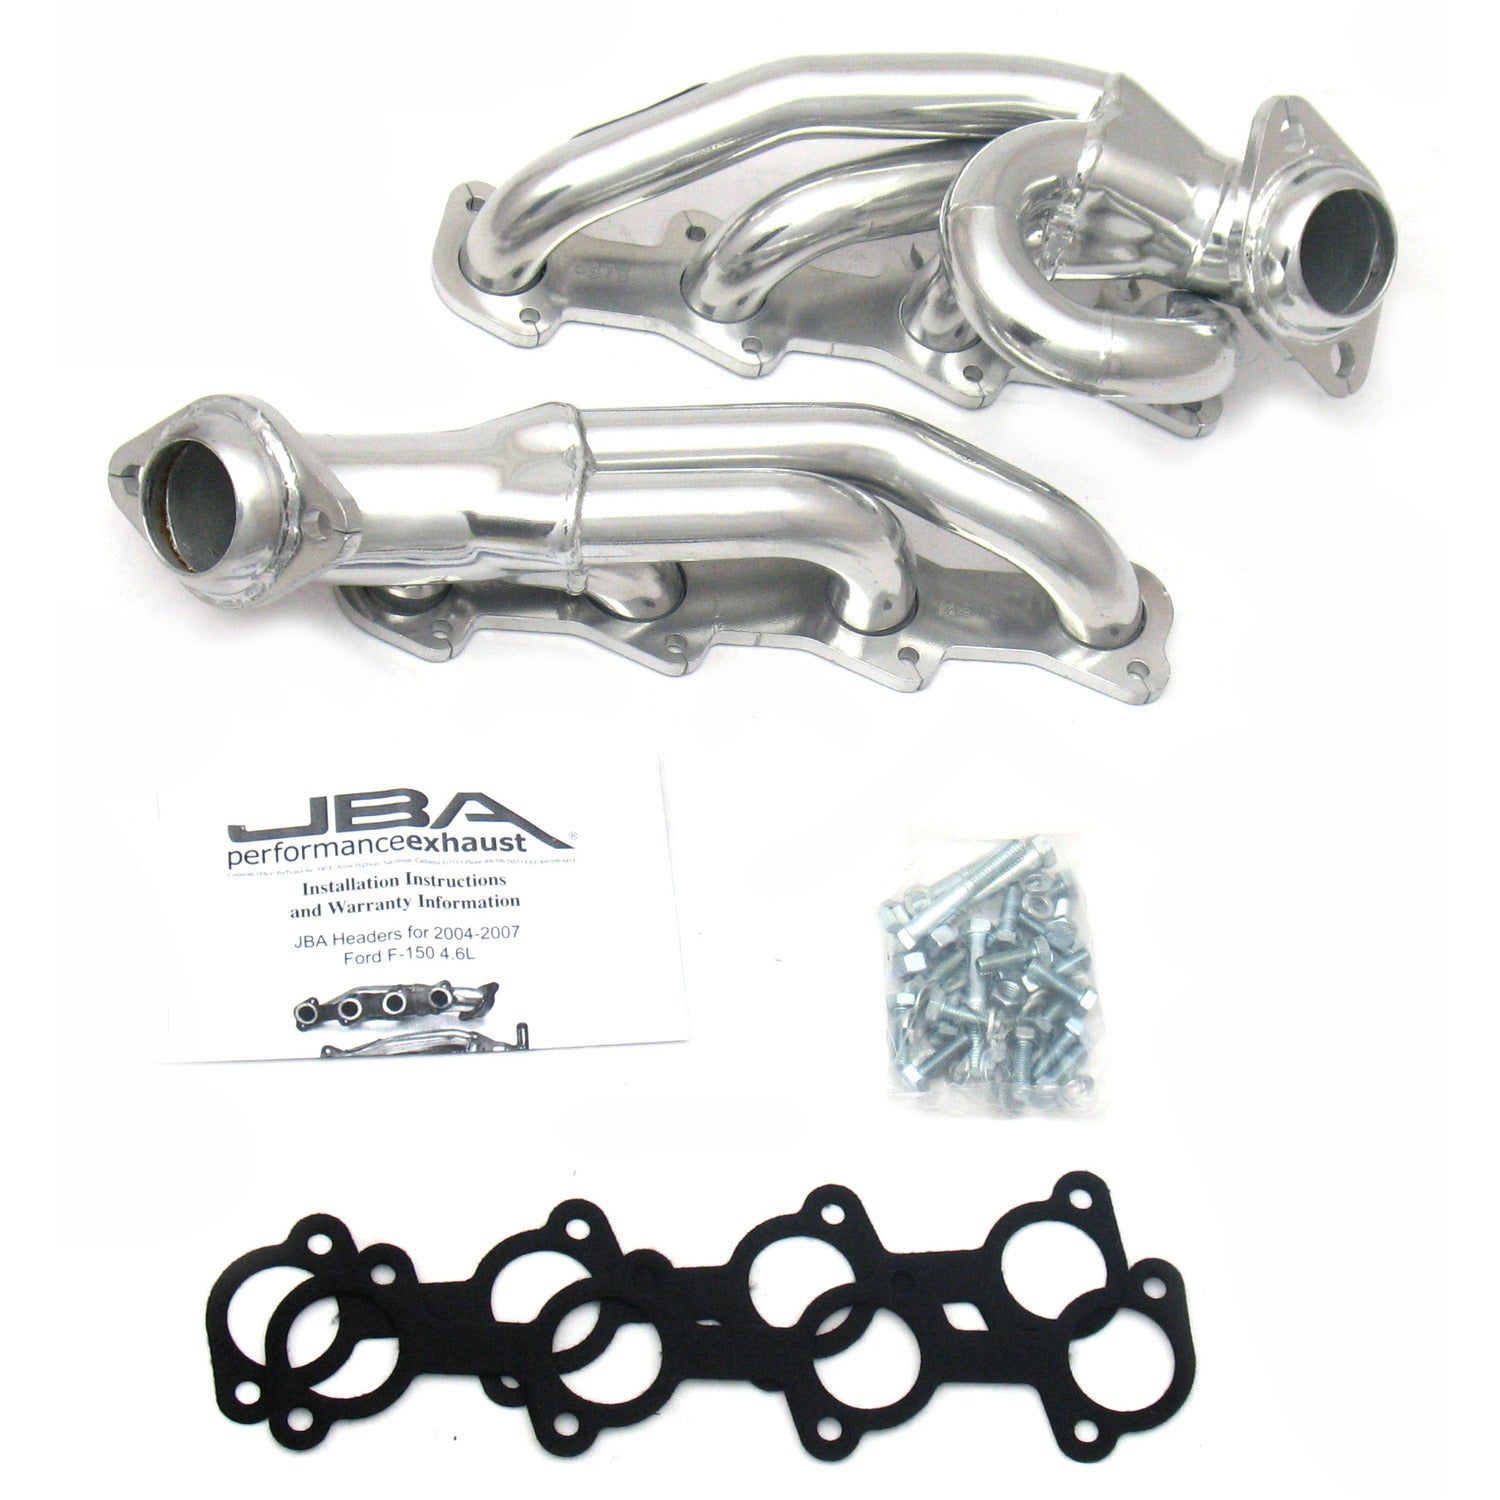 JBA Performance Exhaust 1687SJS 1 1/2" Header Shorty Stainless Steel 04-08 Ford F-150 4.6L Silver Ceramic